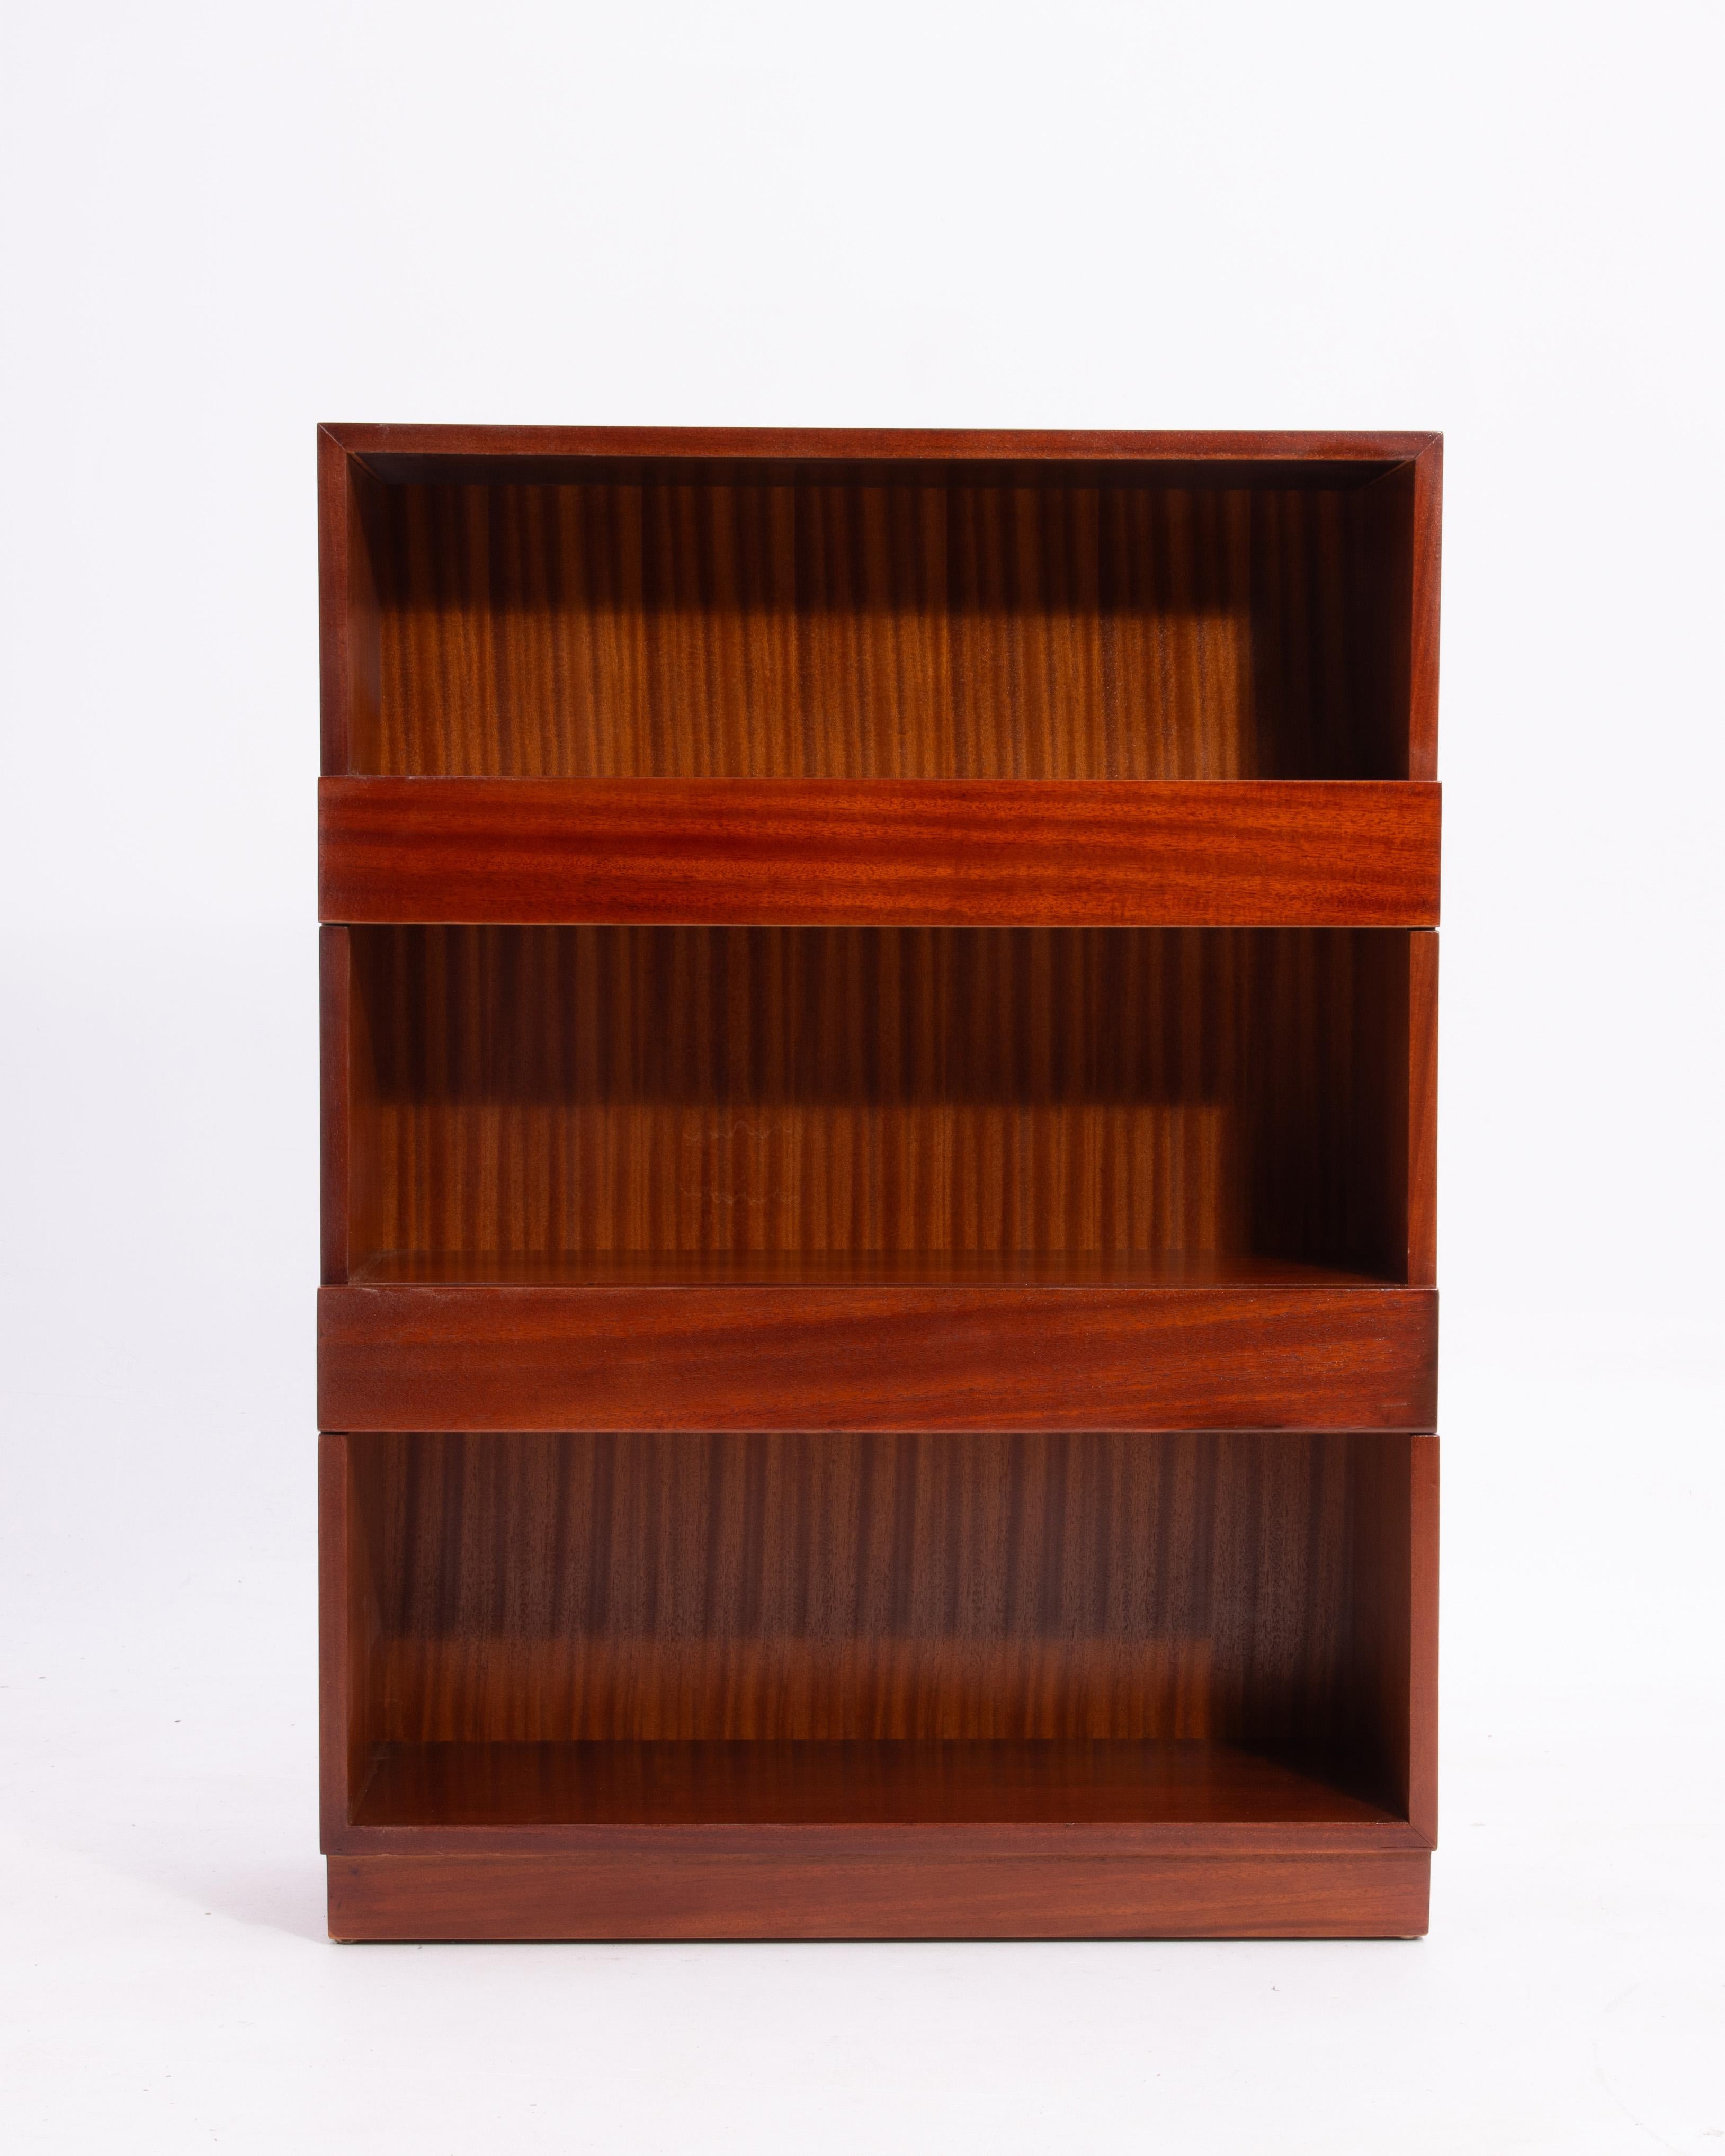 A well made and designed bookcase by Edward Wormley for Dunbar and sold by Pioneer Furniture Company, 